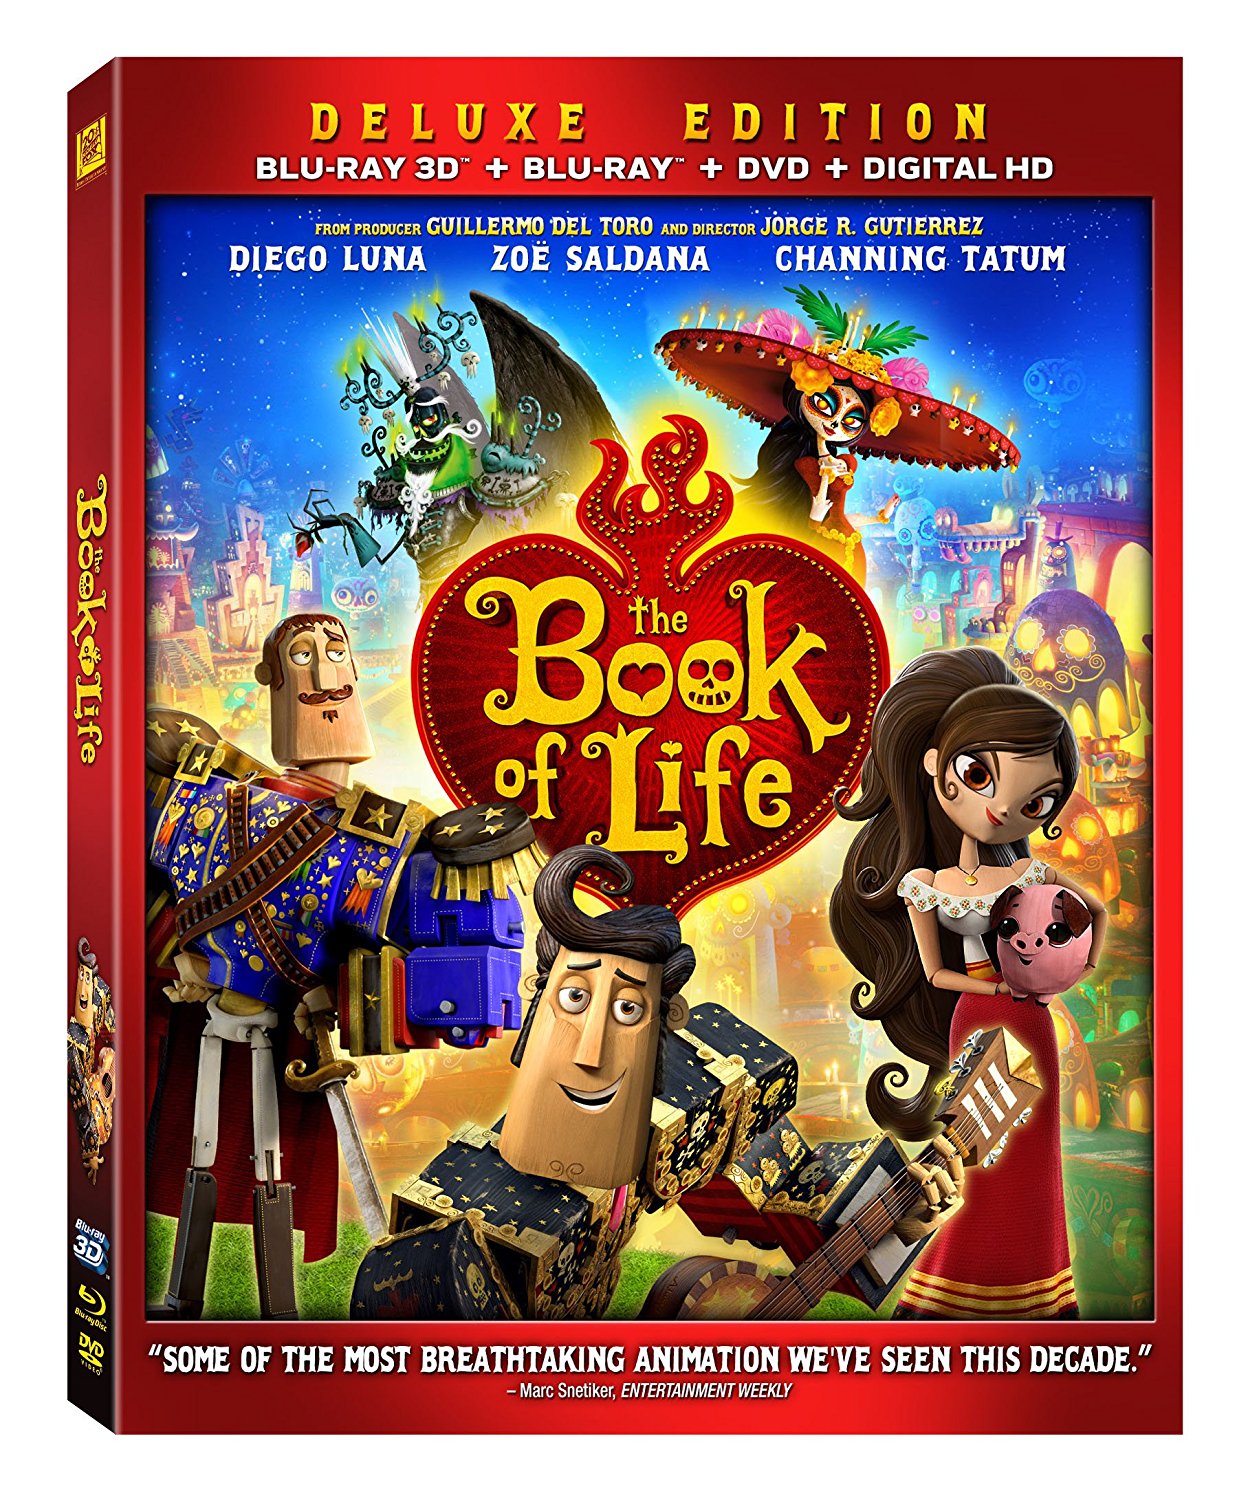 Select Blu-ray 3D Movies $6.99 Each: The Book of Life (Blu-ray 3D + Blu-ray + DVD + Digital HD) & More + Free Shipping @ Foxconnect